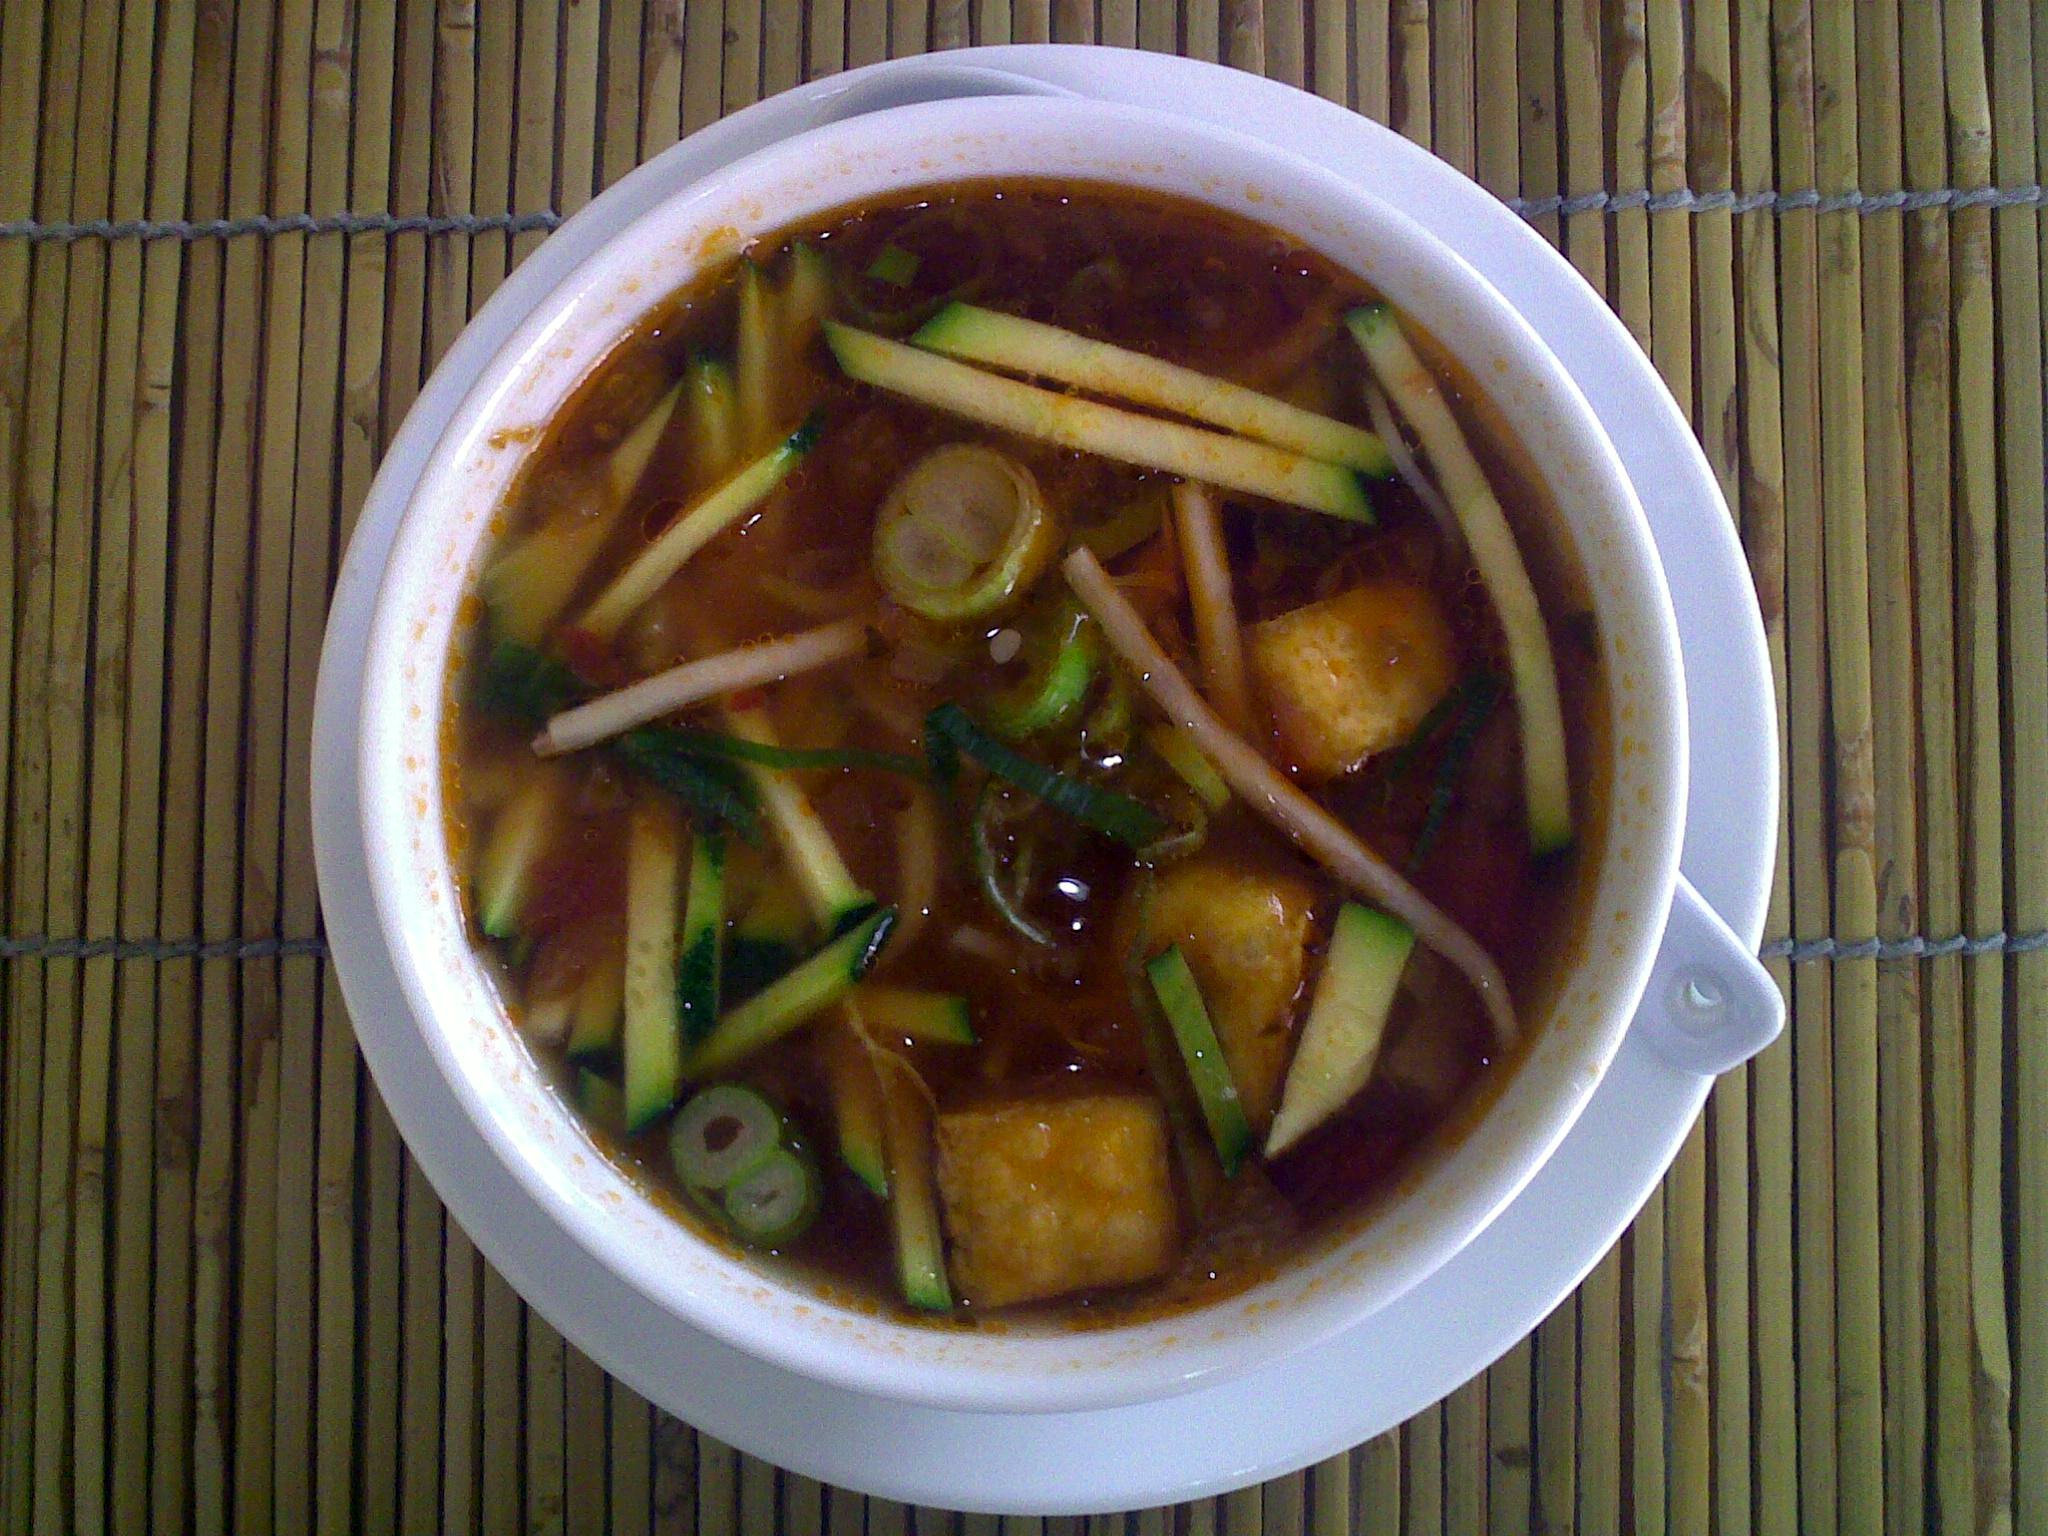 a bowl of soup containing vegetables and sauce